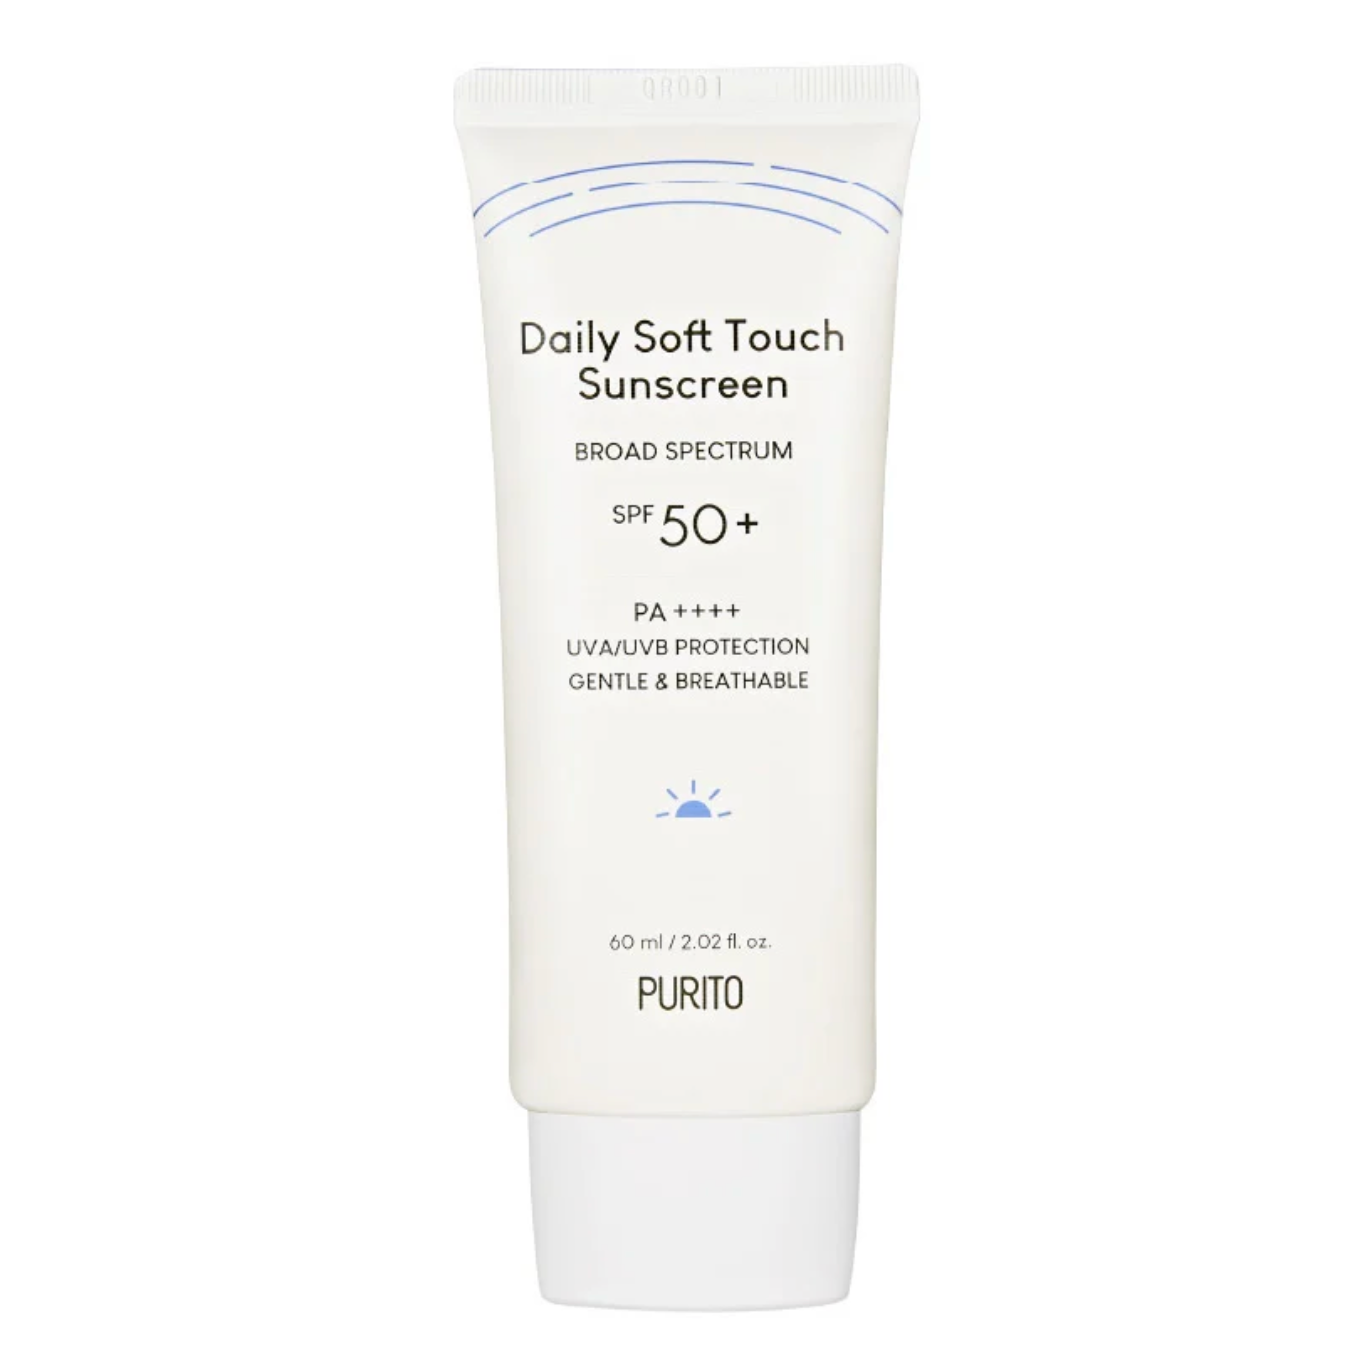 PURITO DAILY SOFT TOUCH SUNSCREEN (60ML)